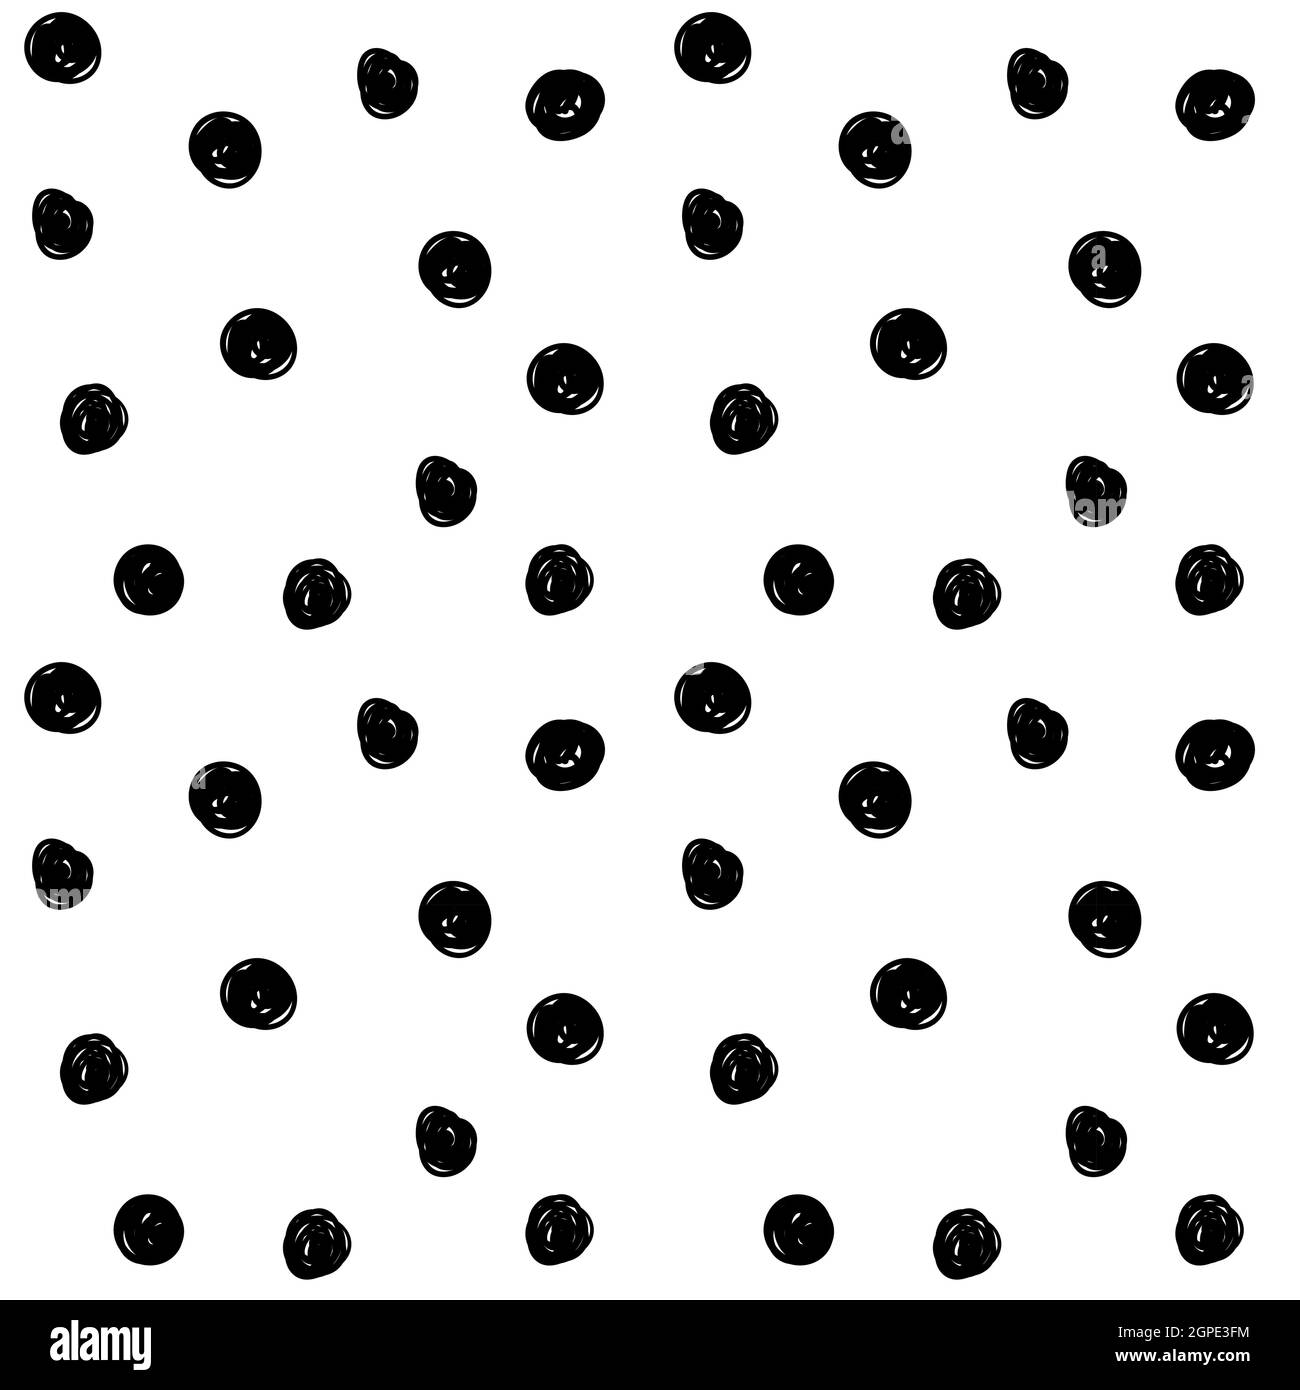 Black dots on white background seamless pattern Vector Image, Dots 